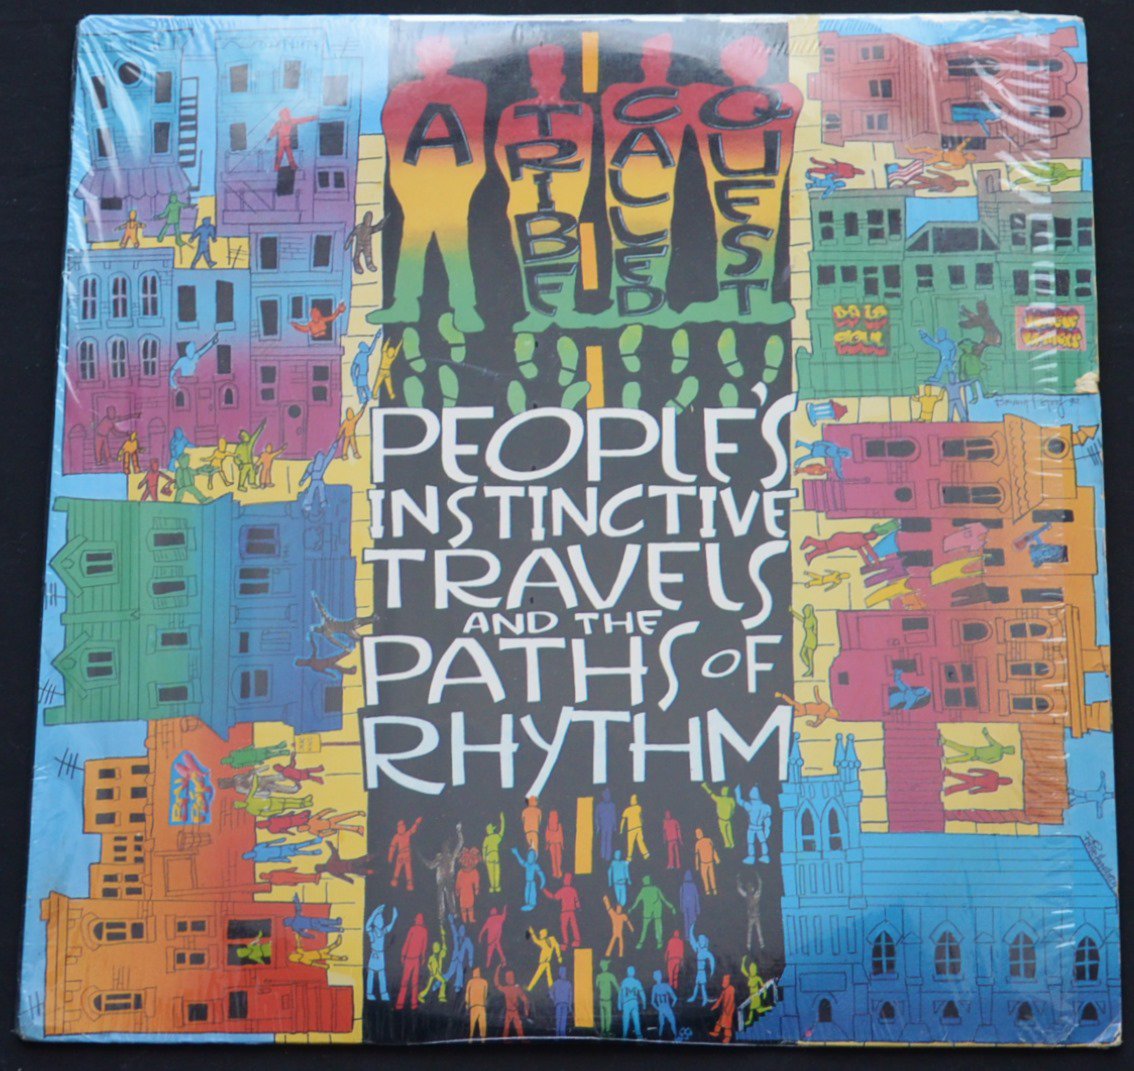 A TRIBE CALLED QUEST / PEOPLE'S INSTINCTIVE TRAVELS AND THE PATHS OF RHYTHM (2LP)